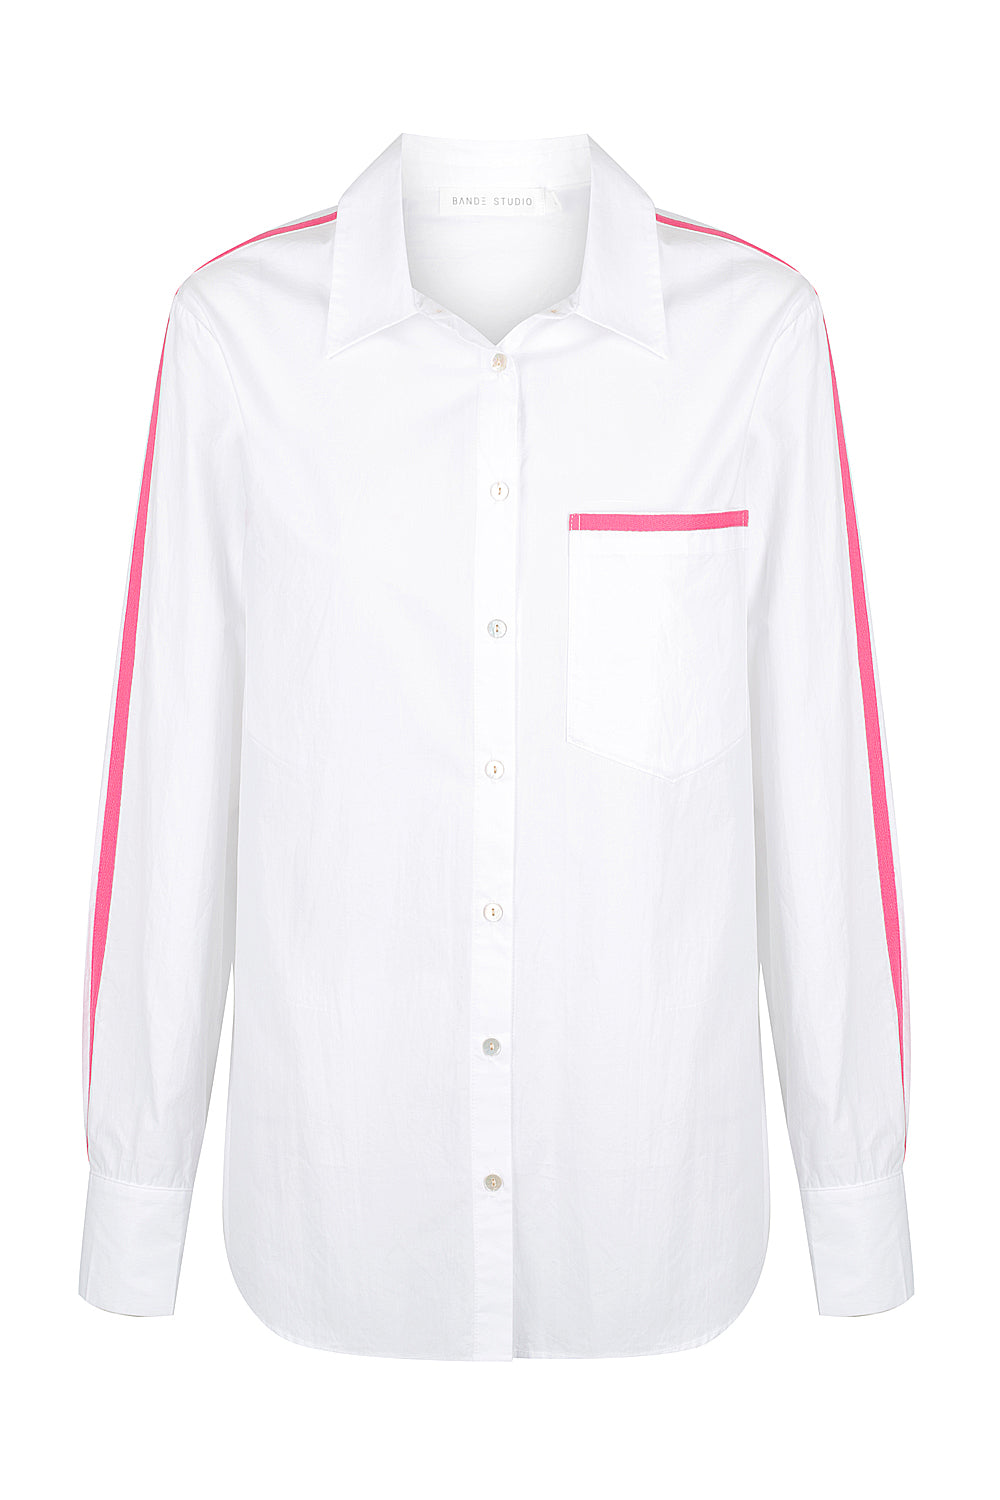 Penelope Piped Shirt